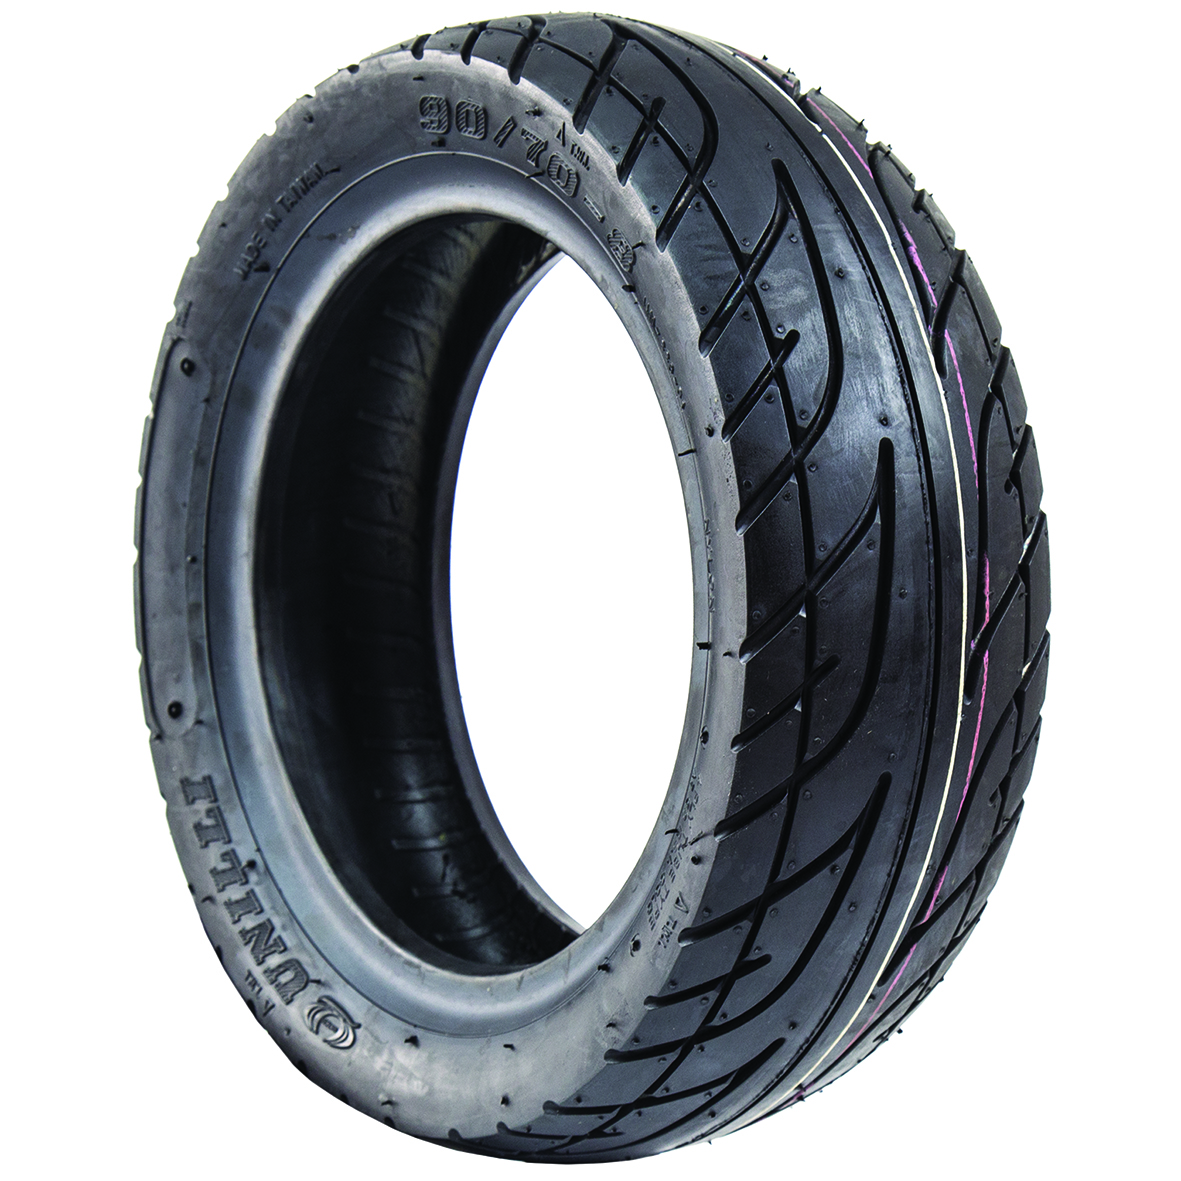 traction tyres for scooters